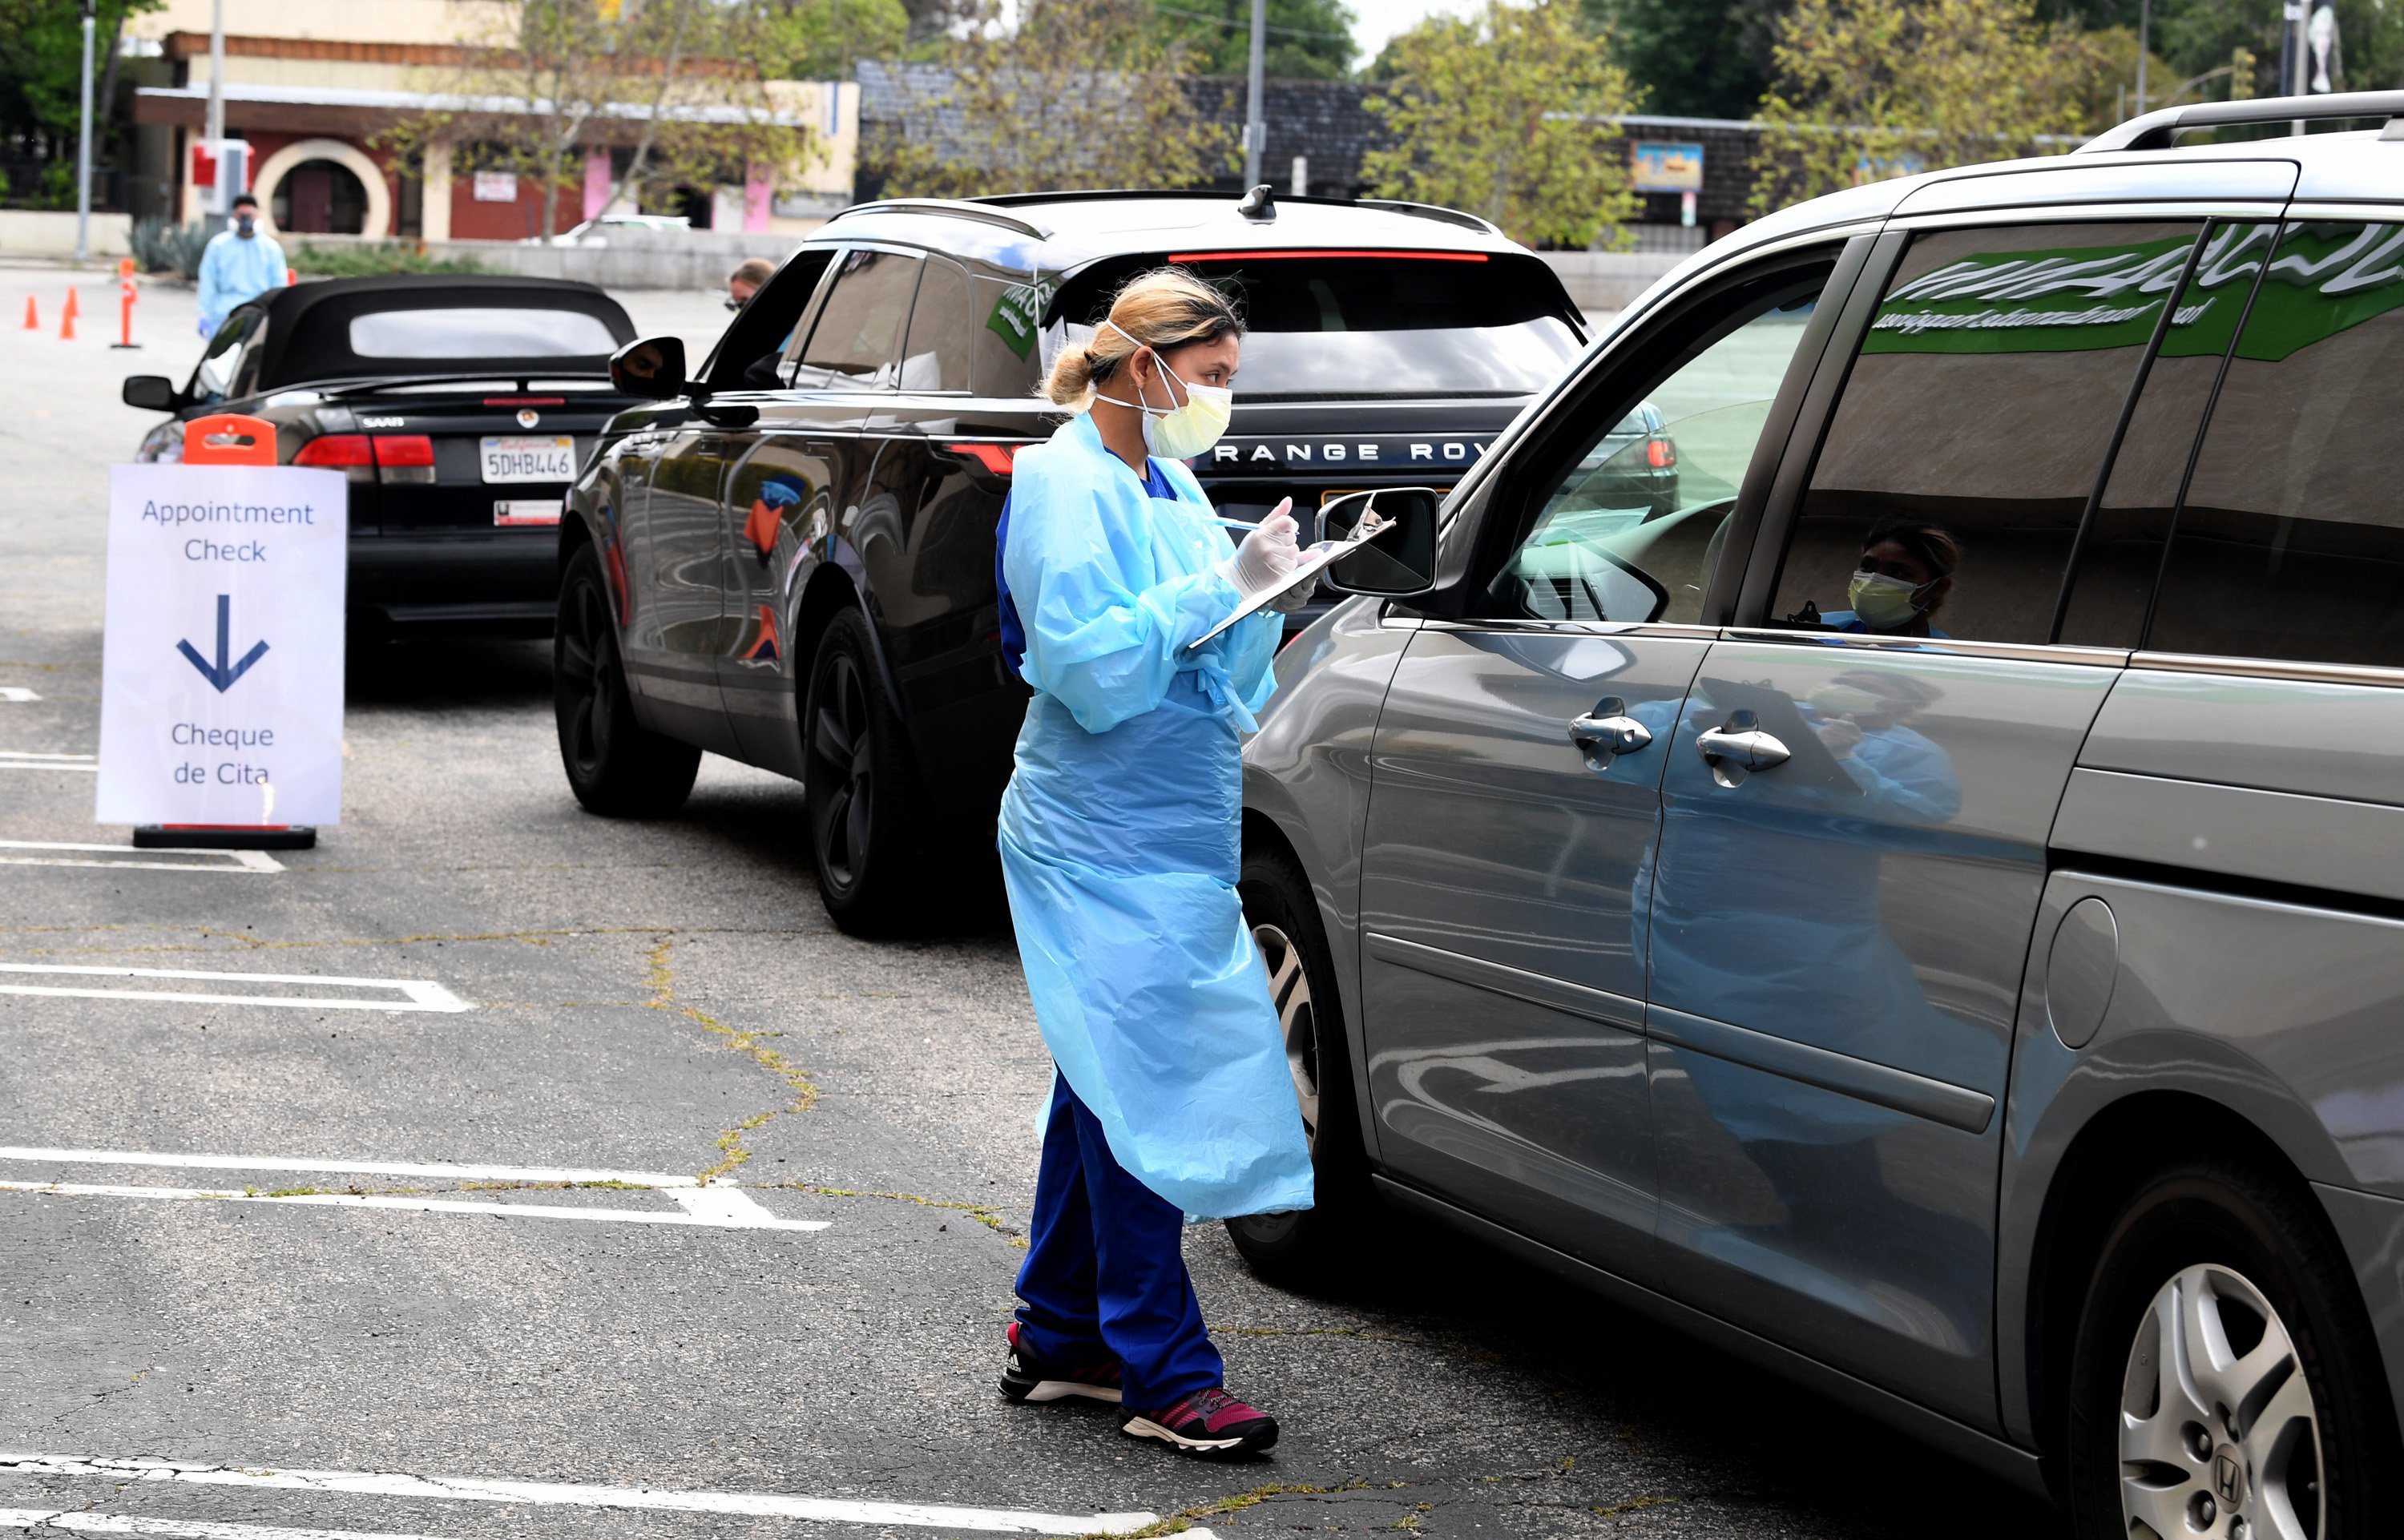 LOS ANGELES, CA - APRIL 13: A worker wearing personal protective equipment gathers the tests administered from a car as Mend Urgent Care hosts a drive-thru testing for the COVID-19 virus at the Westfield Fashion Square on April 13, 2020 in the Sherman Oaks neighborhood of Los Angeles, California. Los Angeles County 'safer at home' orders remain in effect through May 15 to stop the spread of coronavirus during the worldwide pandemic. (Photo by Kevin Winter/Getty Images)